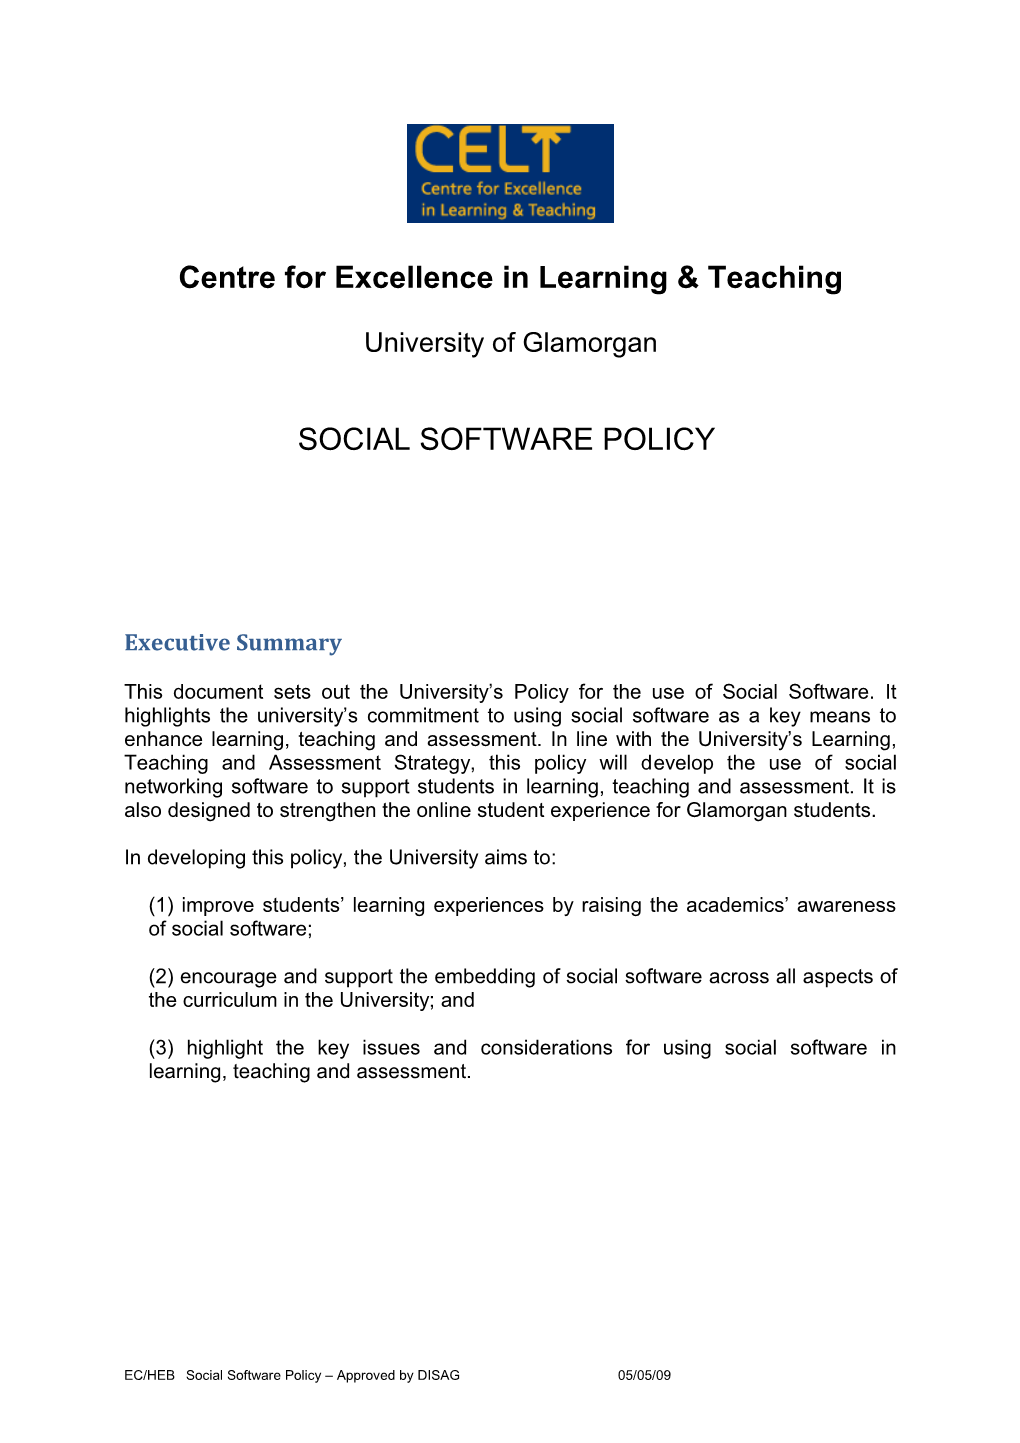 Centre for Excellence in Learning & Teaching